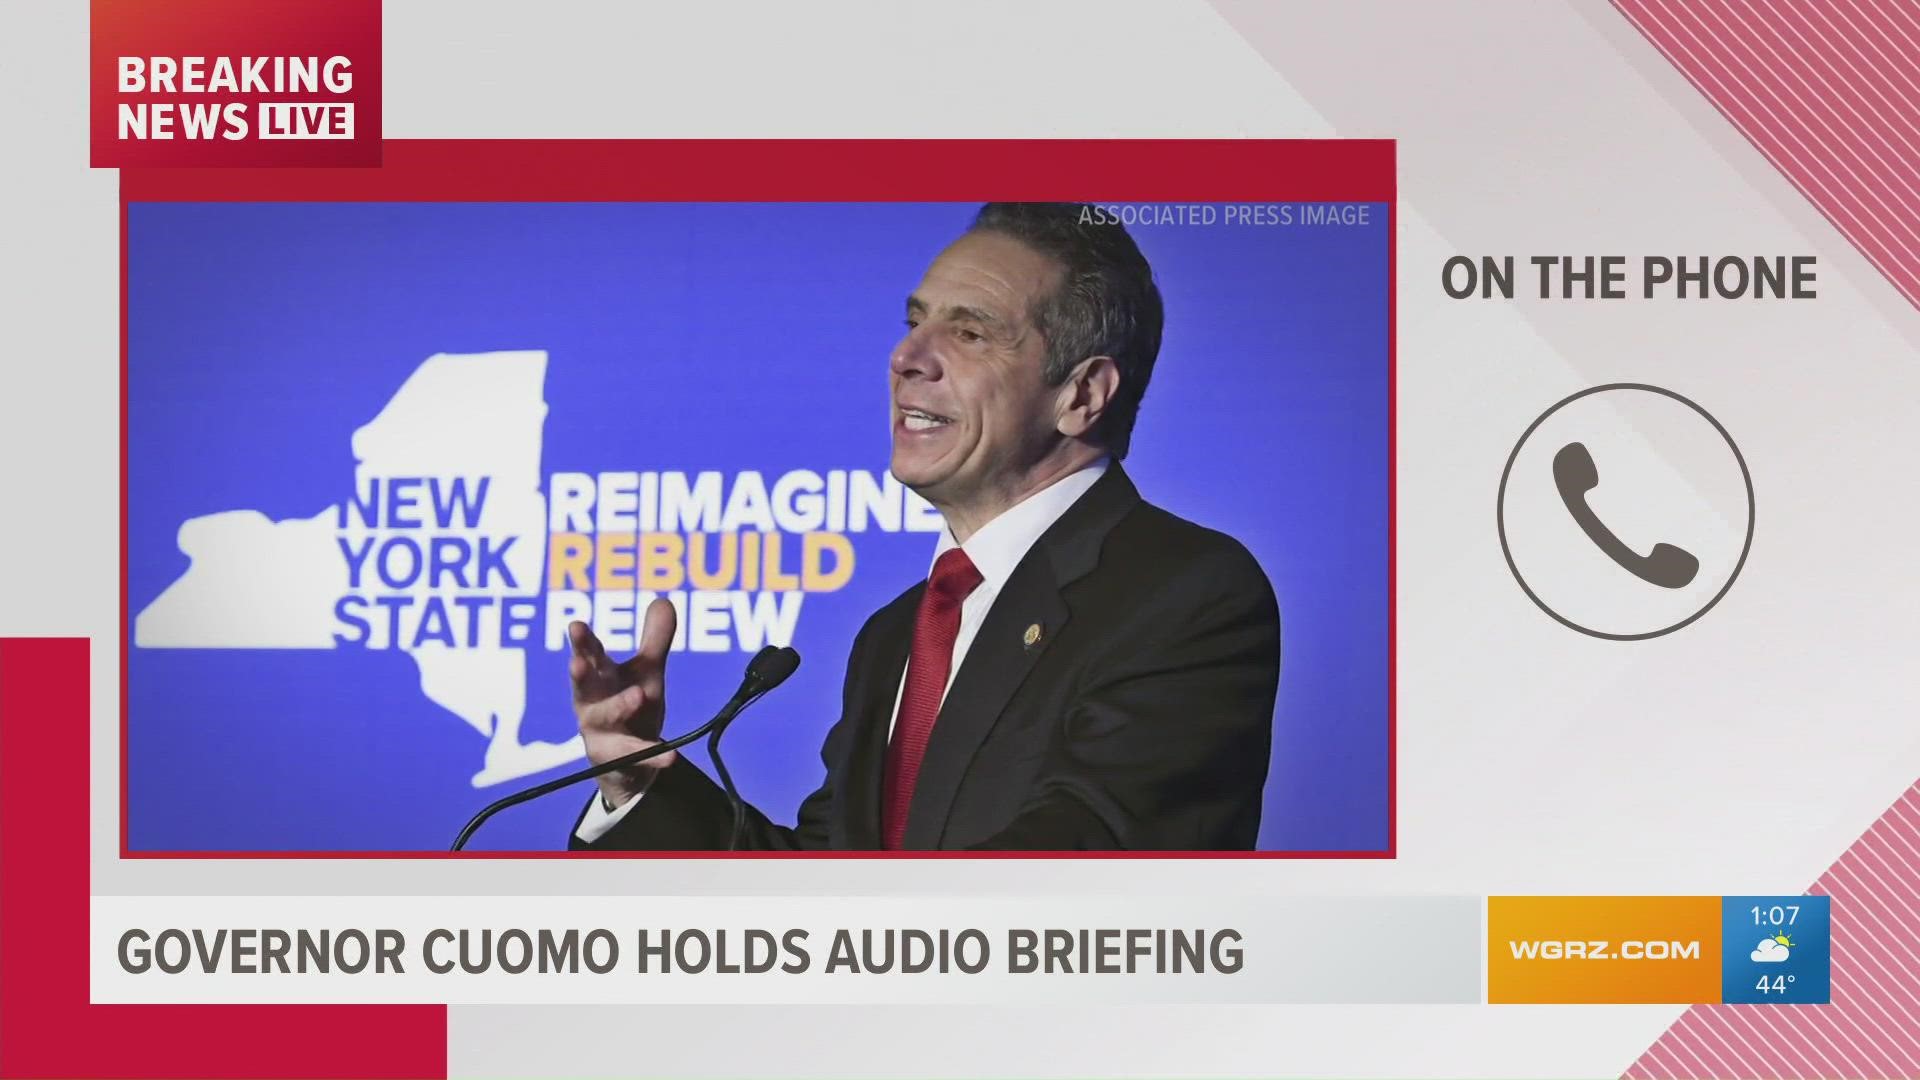 In a conference call with reporters, Gov. Cuomo addressed allegations and said he will not resign.